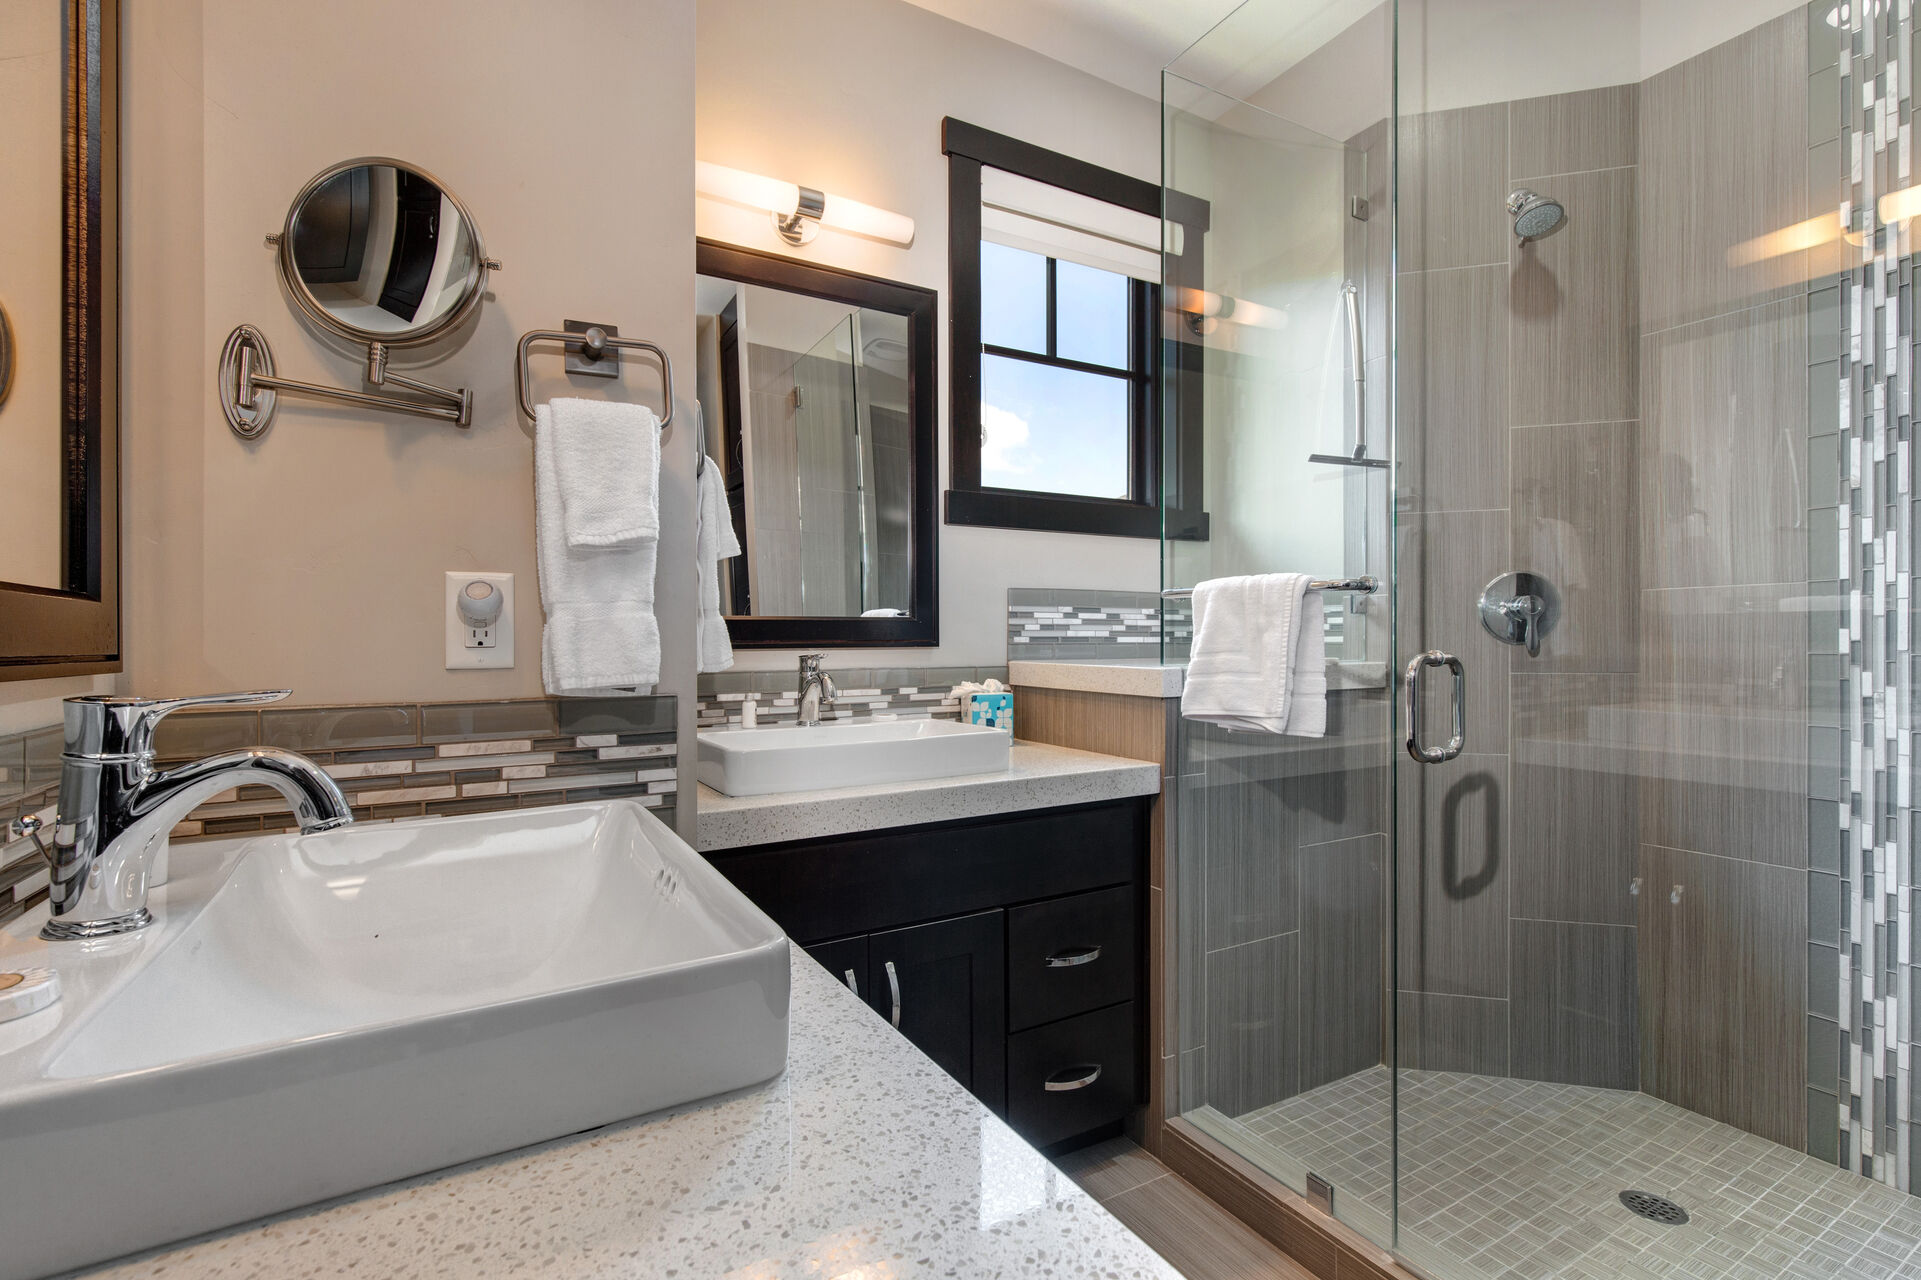 Private Master Bathroom with two separate vanities, and over-sized tile shower